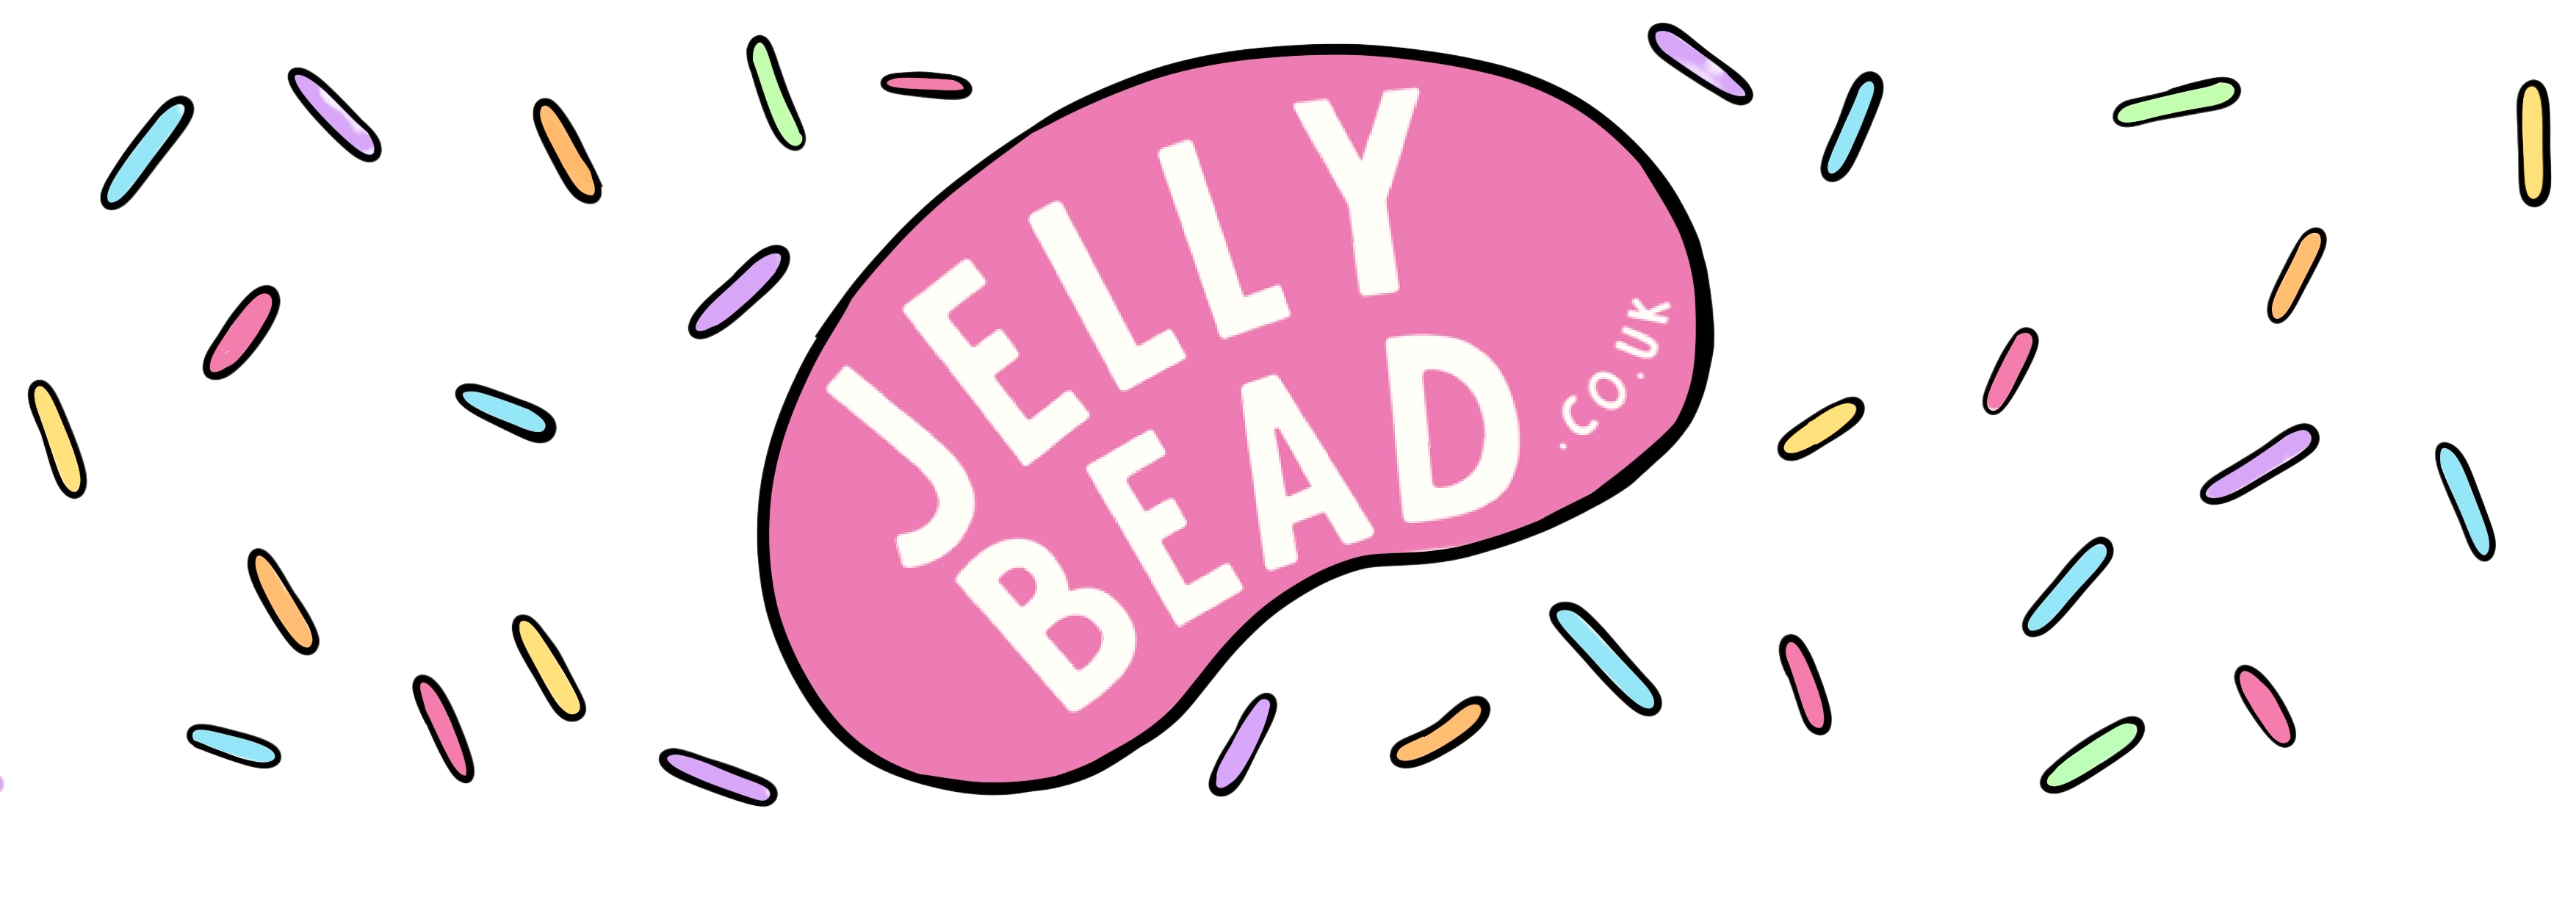 Jelly bead Childrens Slime and Craft parties and workshops